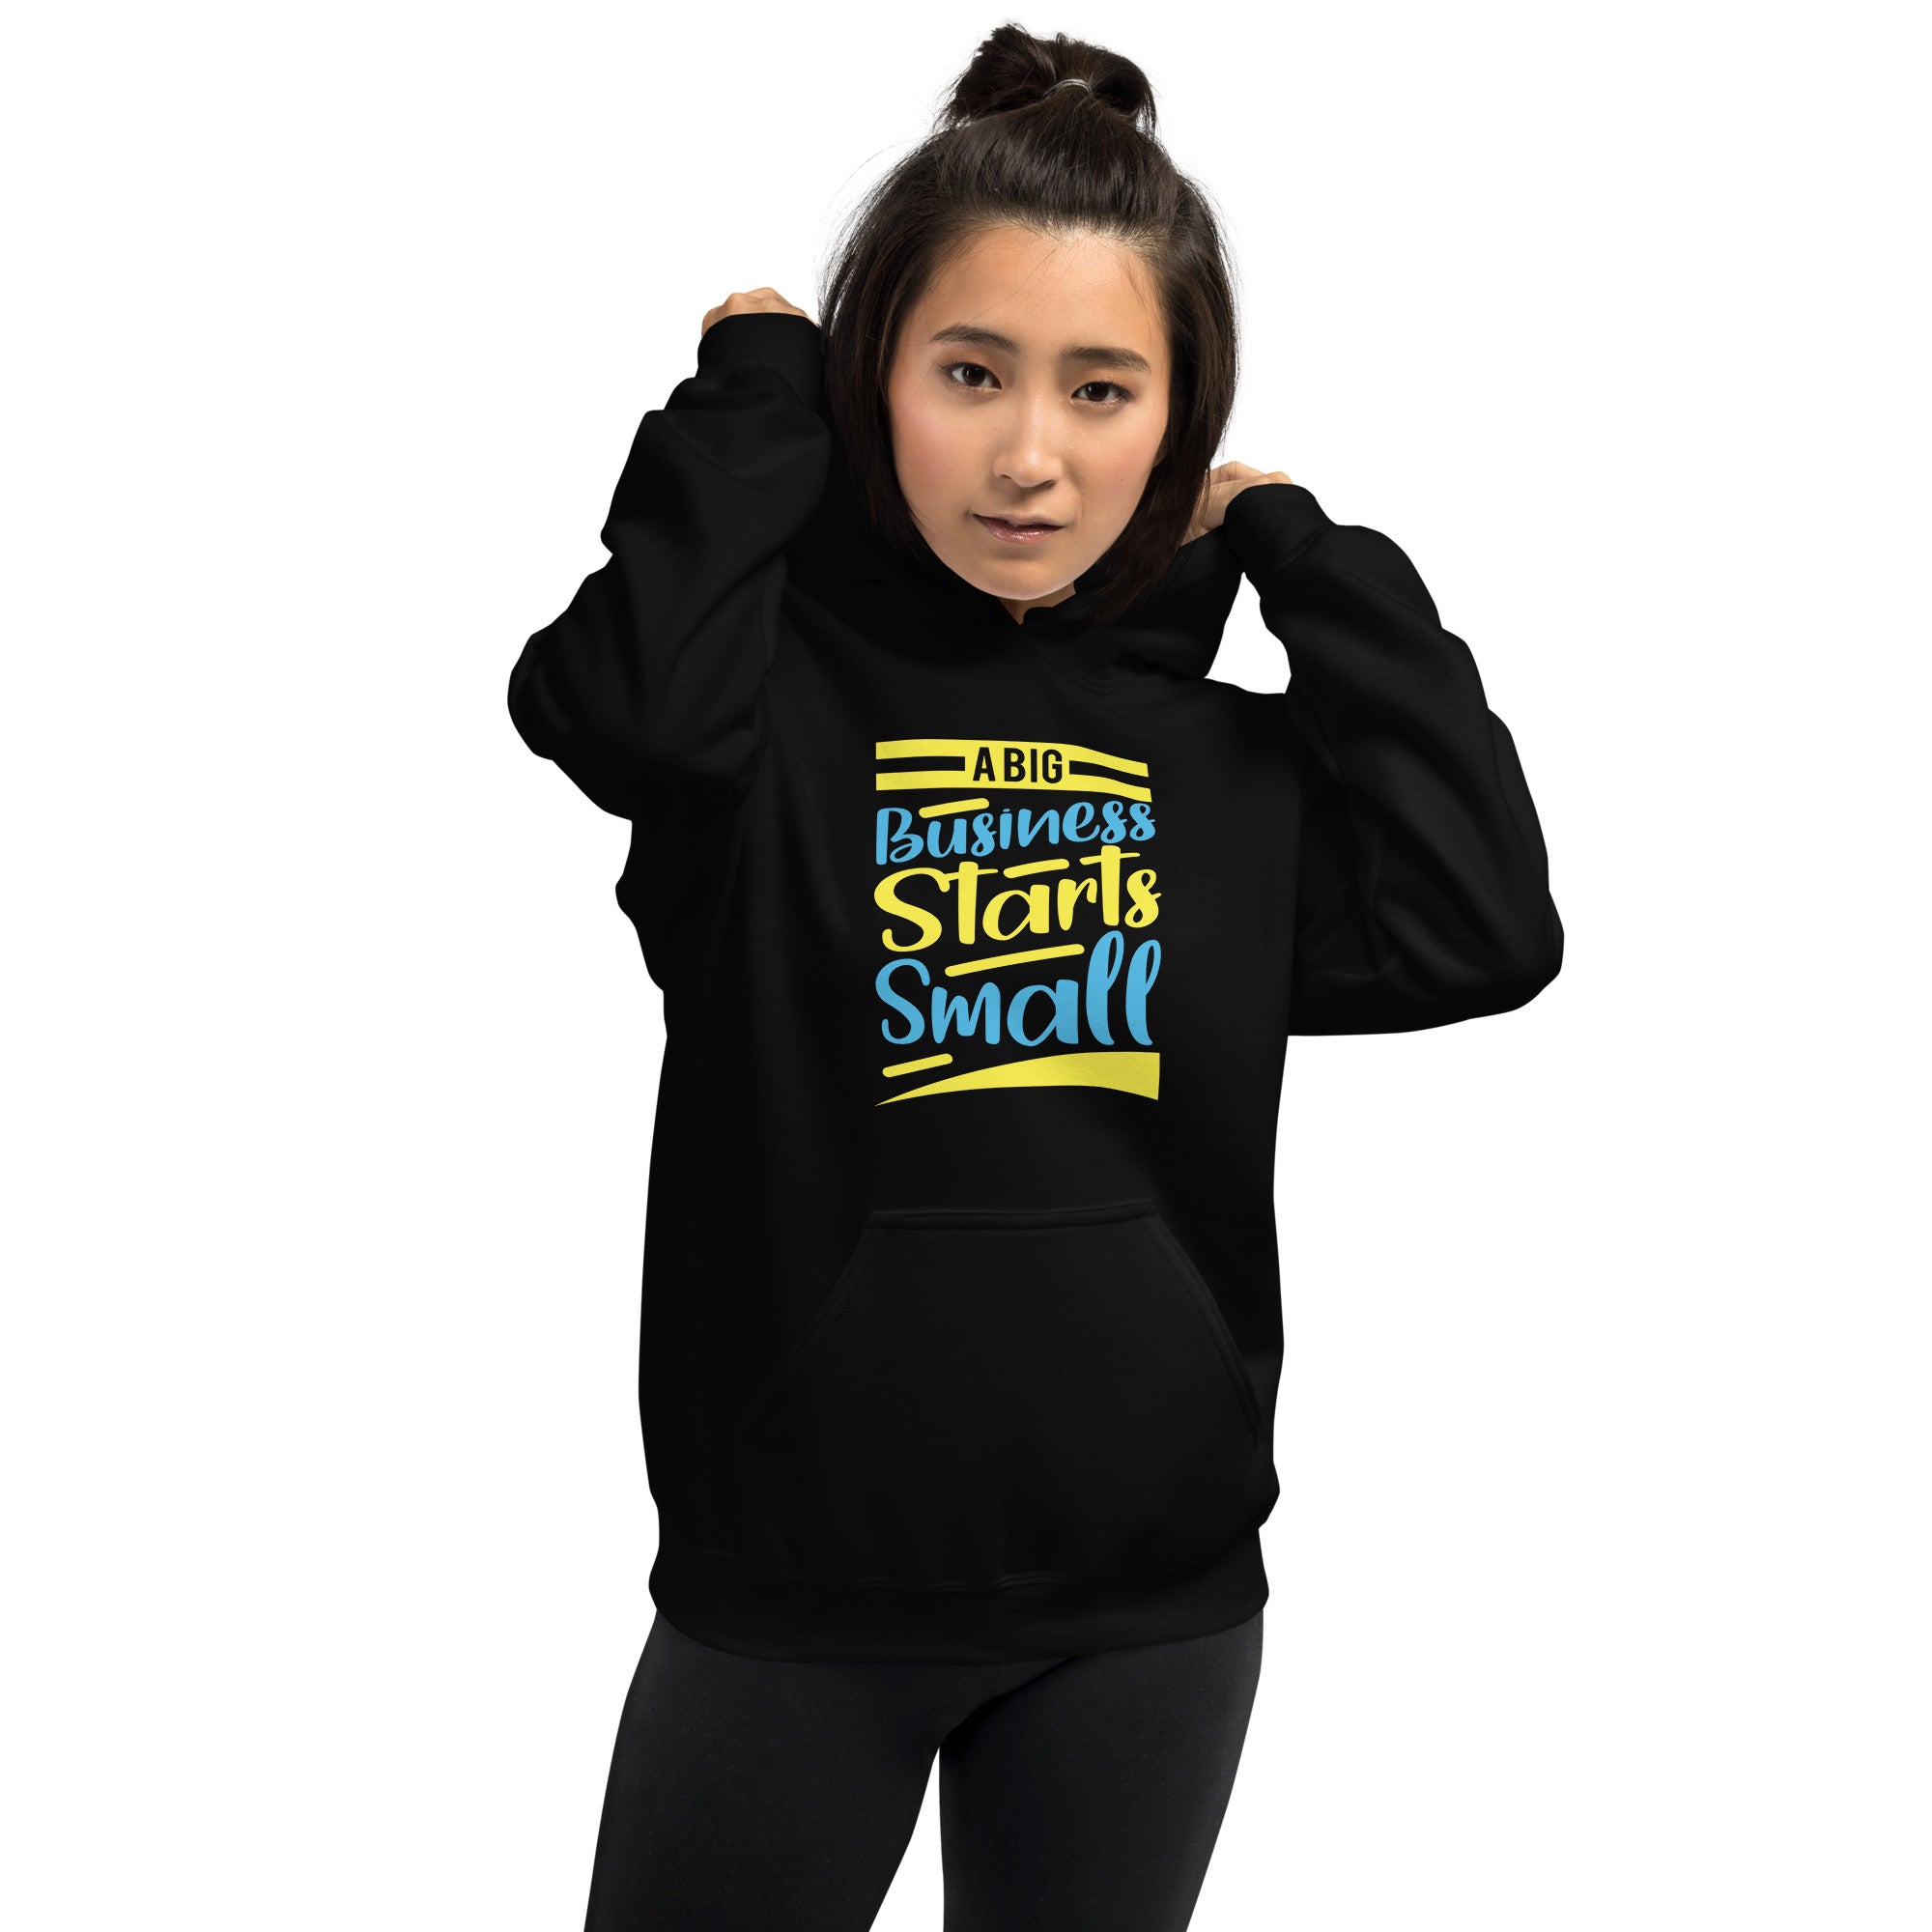 A Big Business Starts Small - Unisex Hoodie